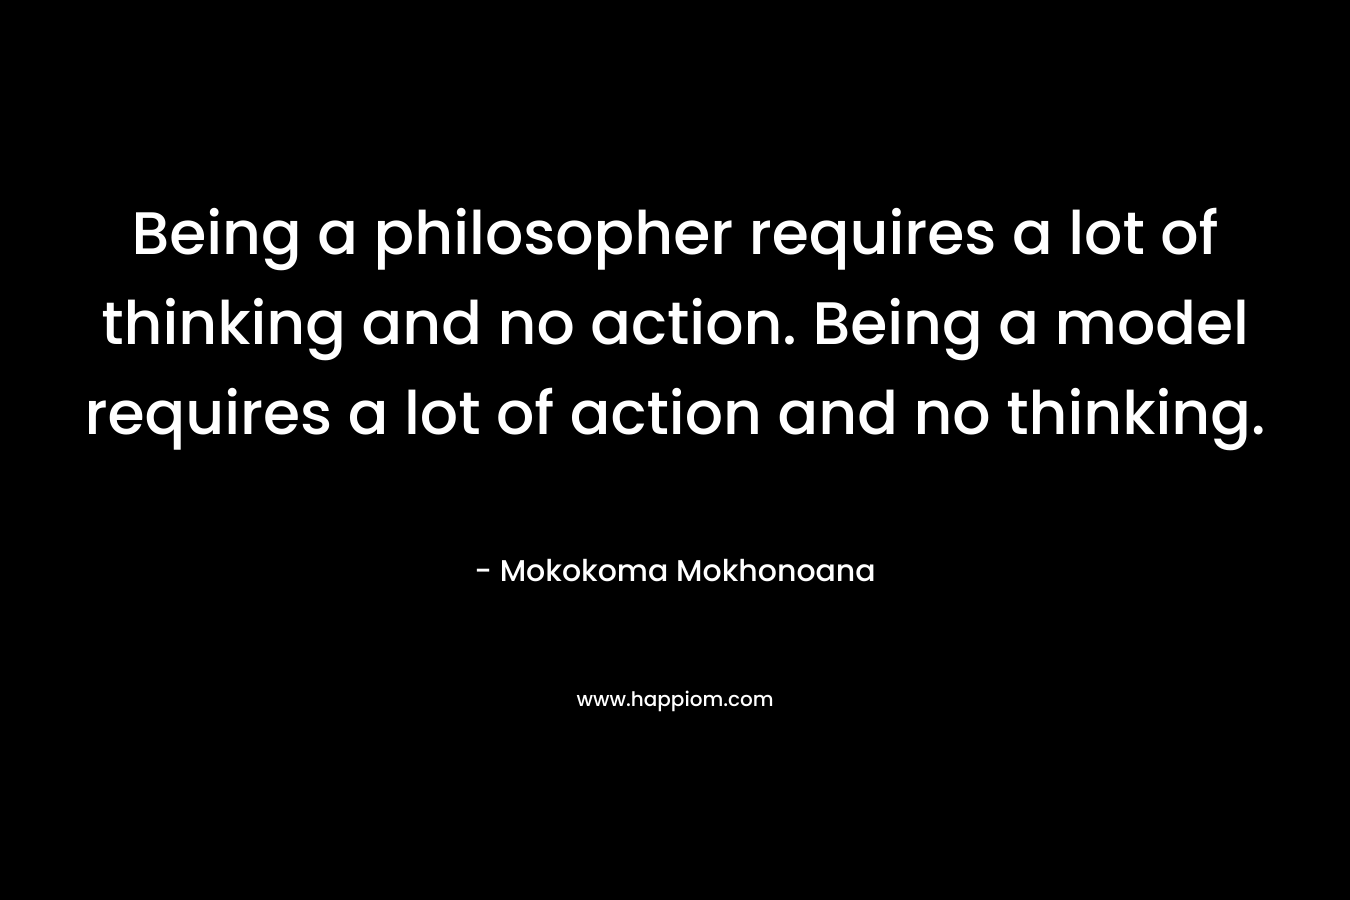 Being a philosopher requires a lot of thinking and no action. Being a model requires a lot of action and no thinking.